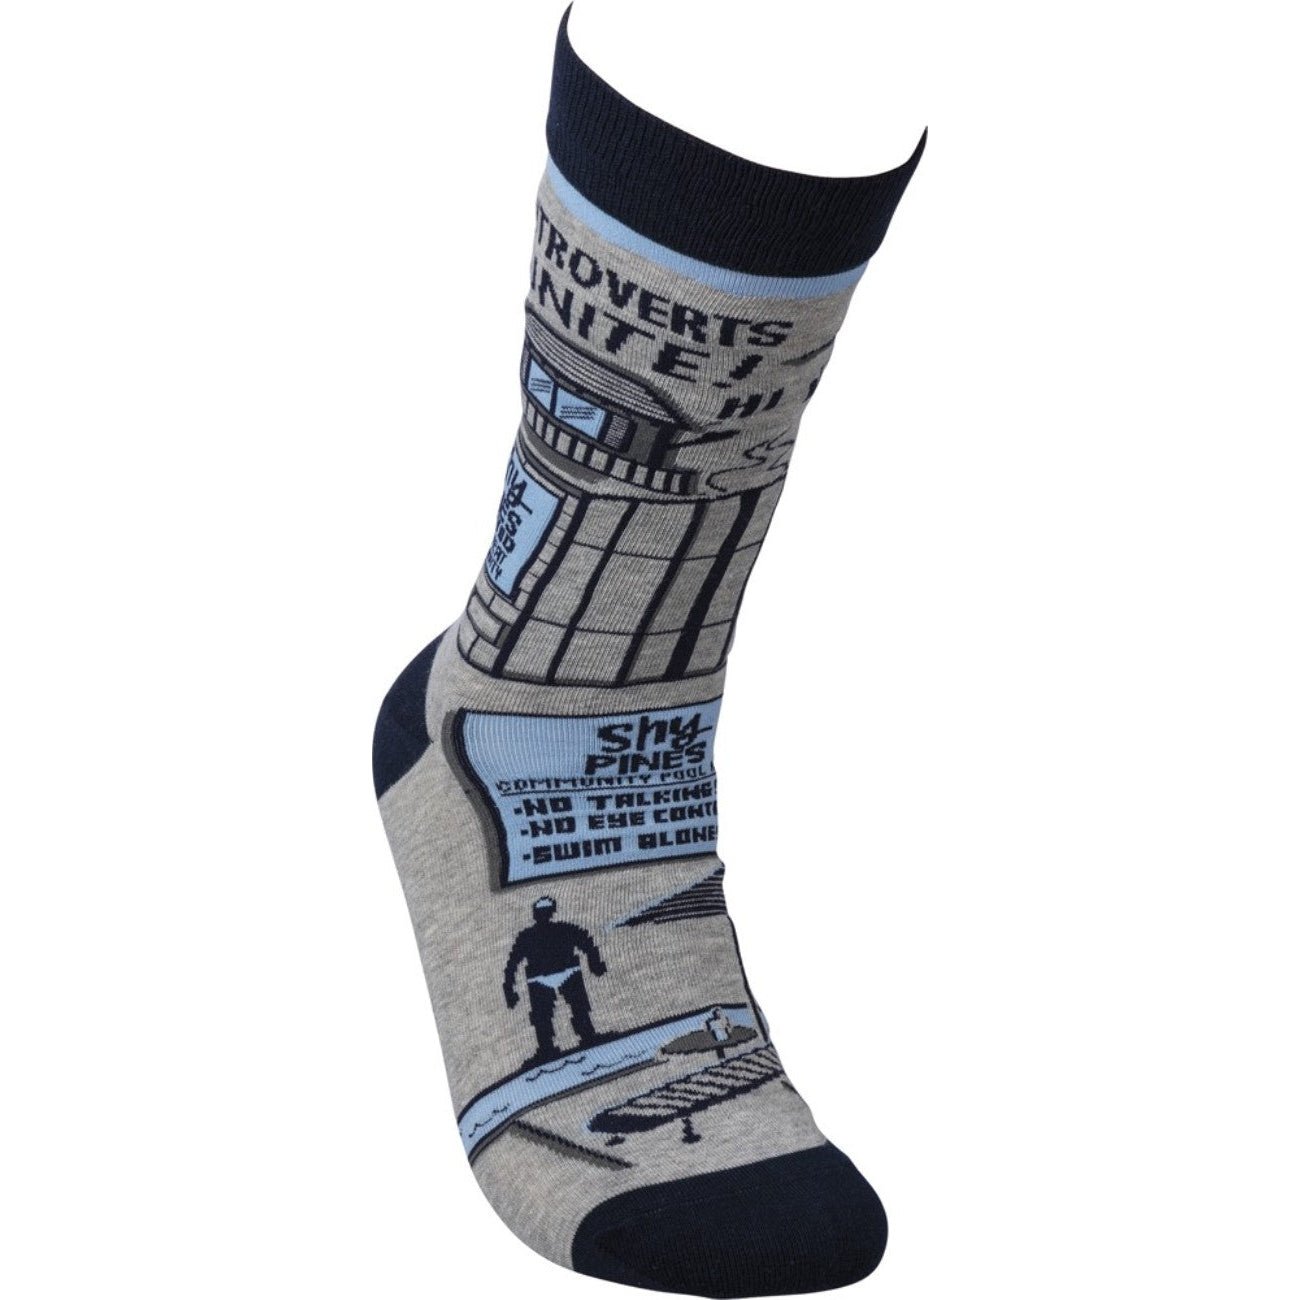 Introverts Unite Black Gray Funny Novelty Socks with Cool Design, Bold/Crazy/Unique Specialty Dress Socks